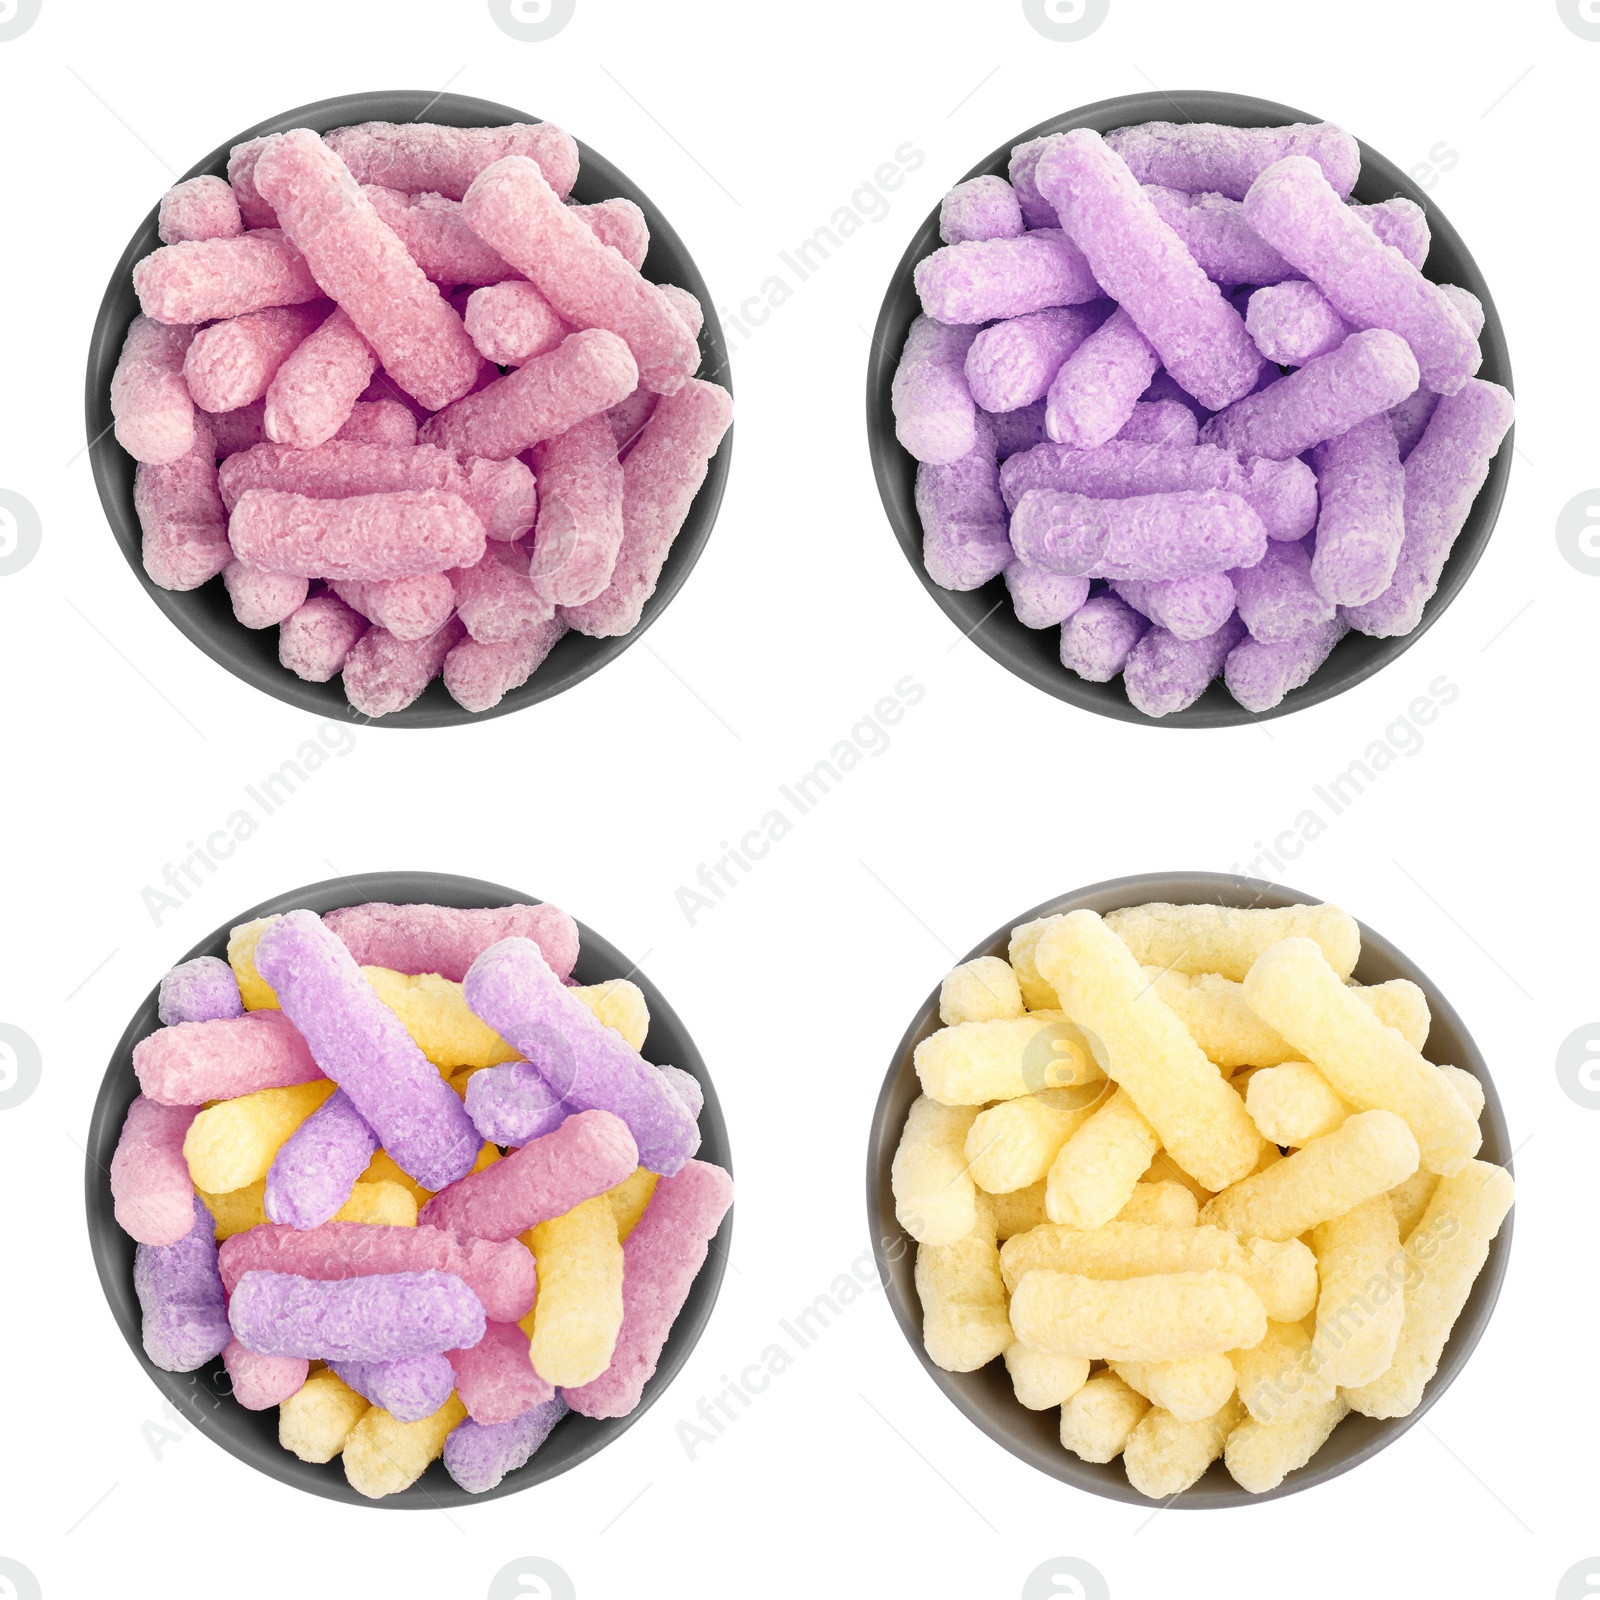 Image of Set of bowls with colorful corn puffs on white background, top view